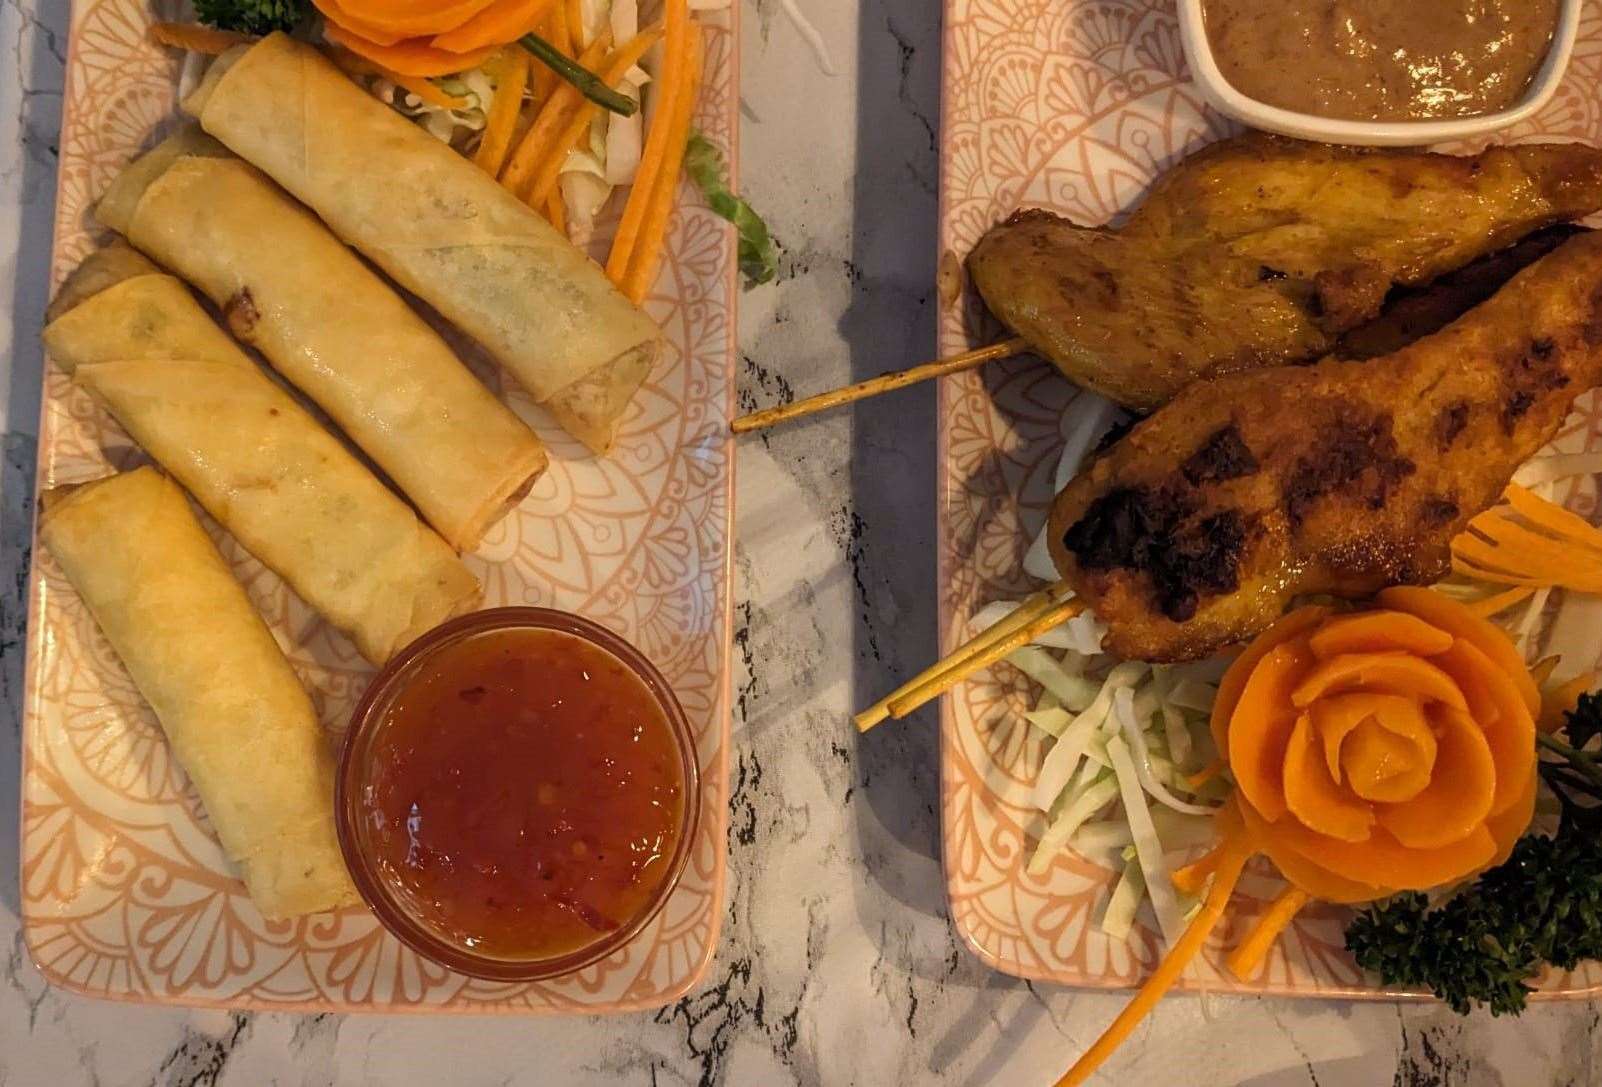 Crispy spring rolls and chicken satay skewers are a pair of classic starters